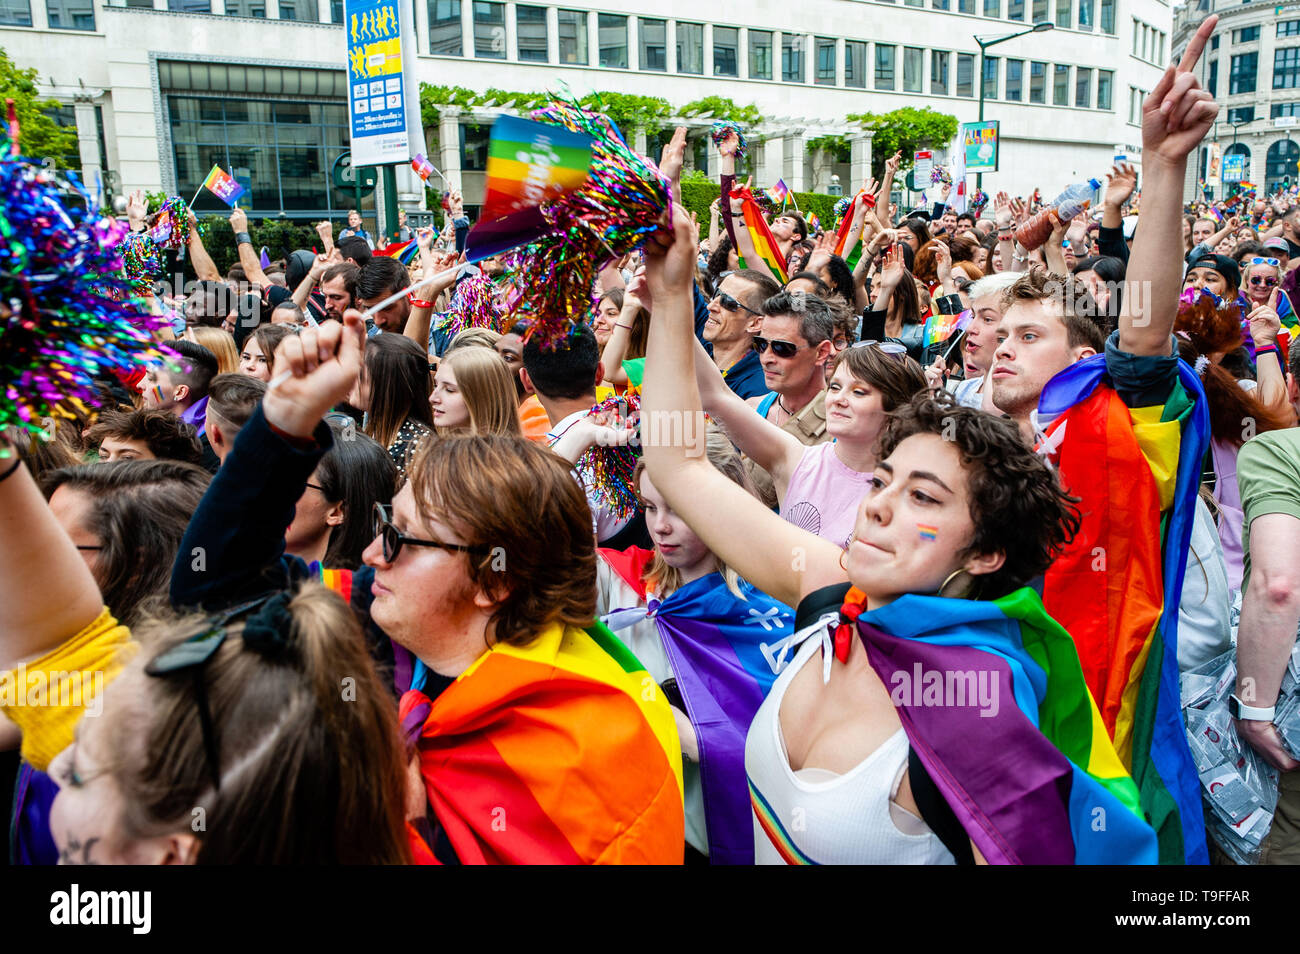 Brussels, North Brabant, Belgium. 18th May, 2019. People are seen dancing  wearing rainbows flags during the parade.The 24th Belgian Pride parade took  place in Brussels and it kicked off at 13:45 pm